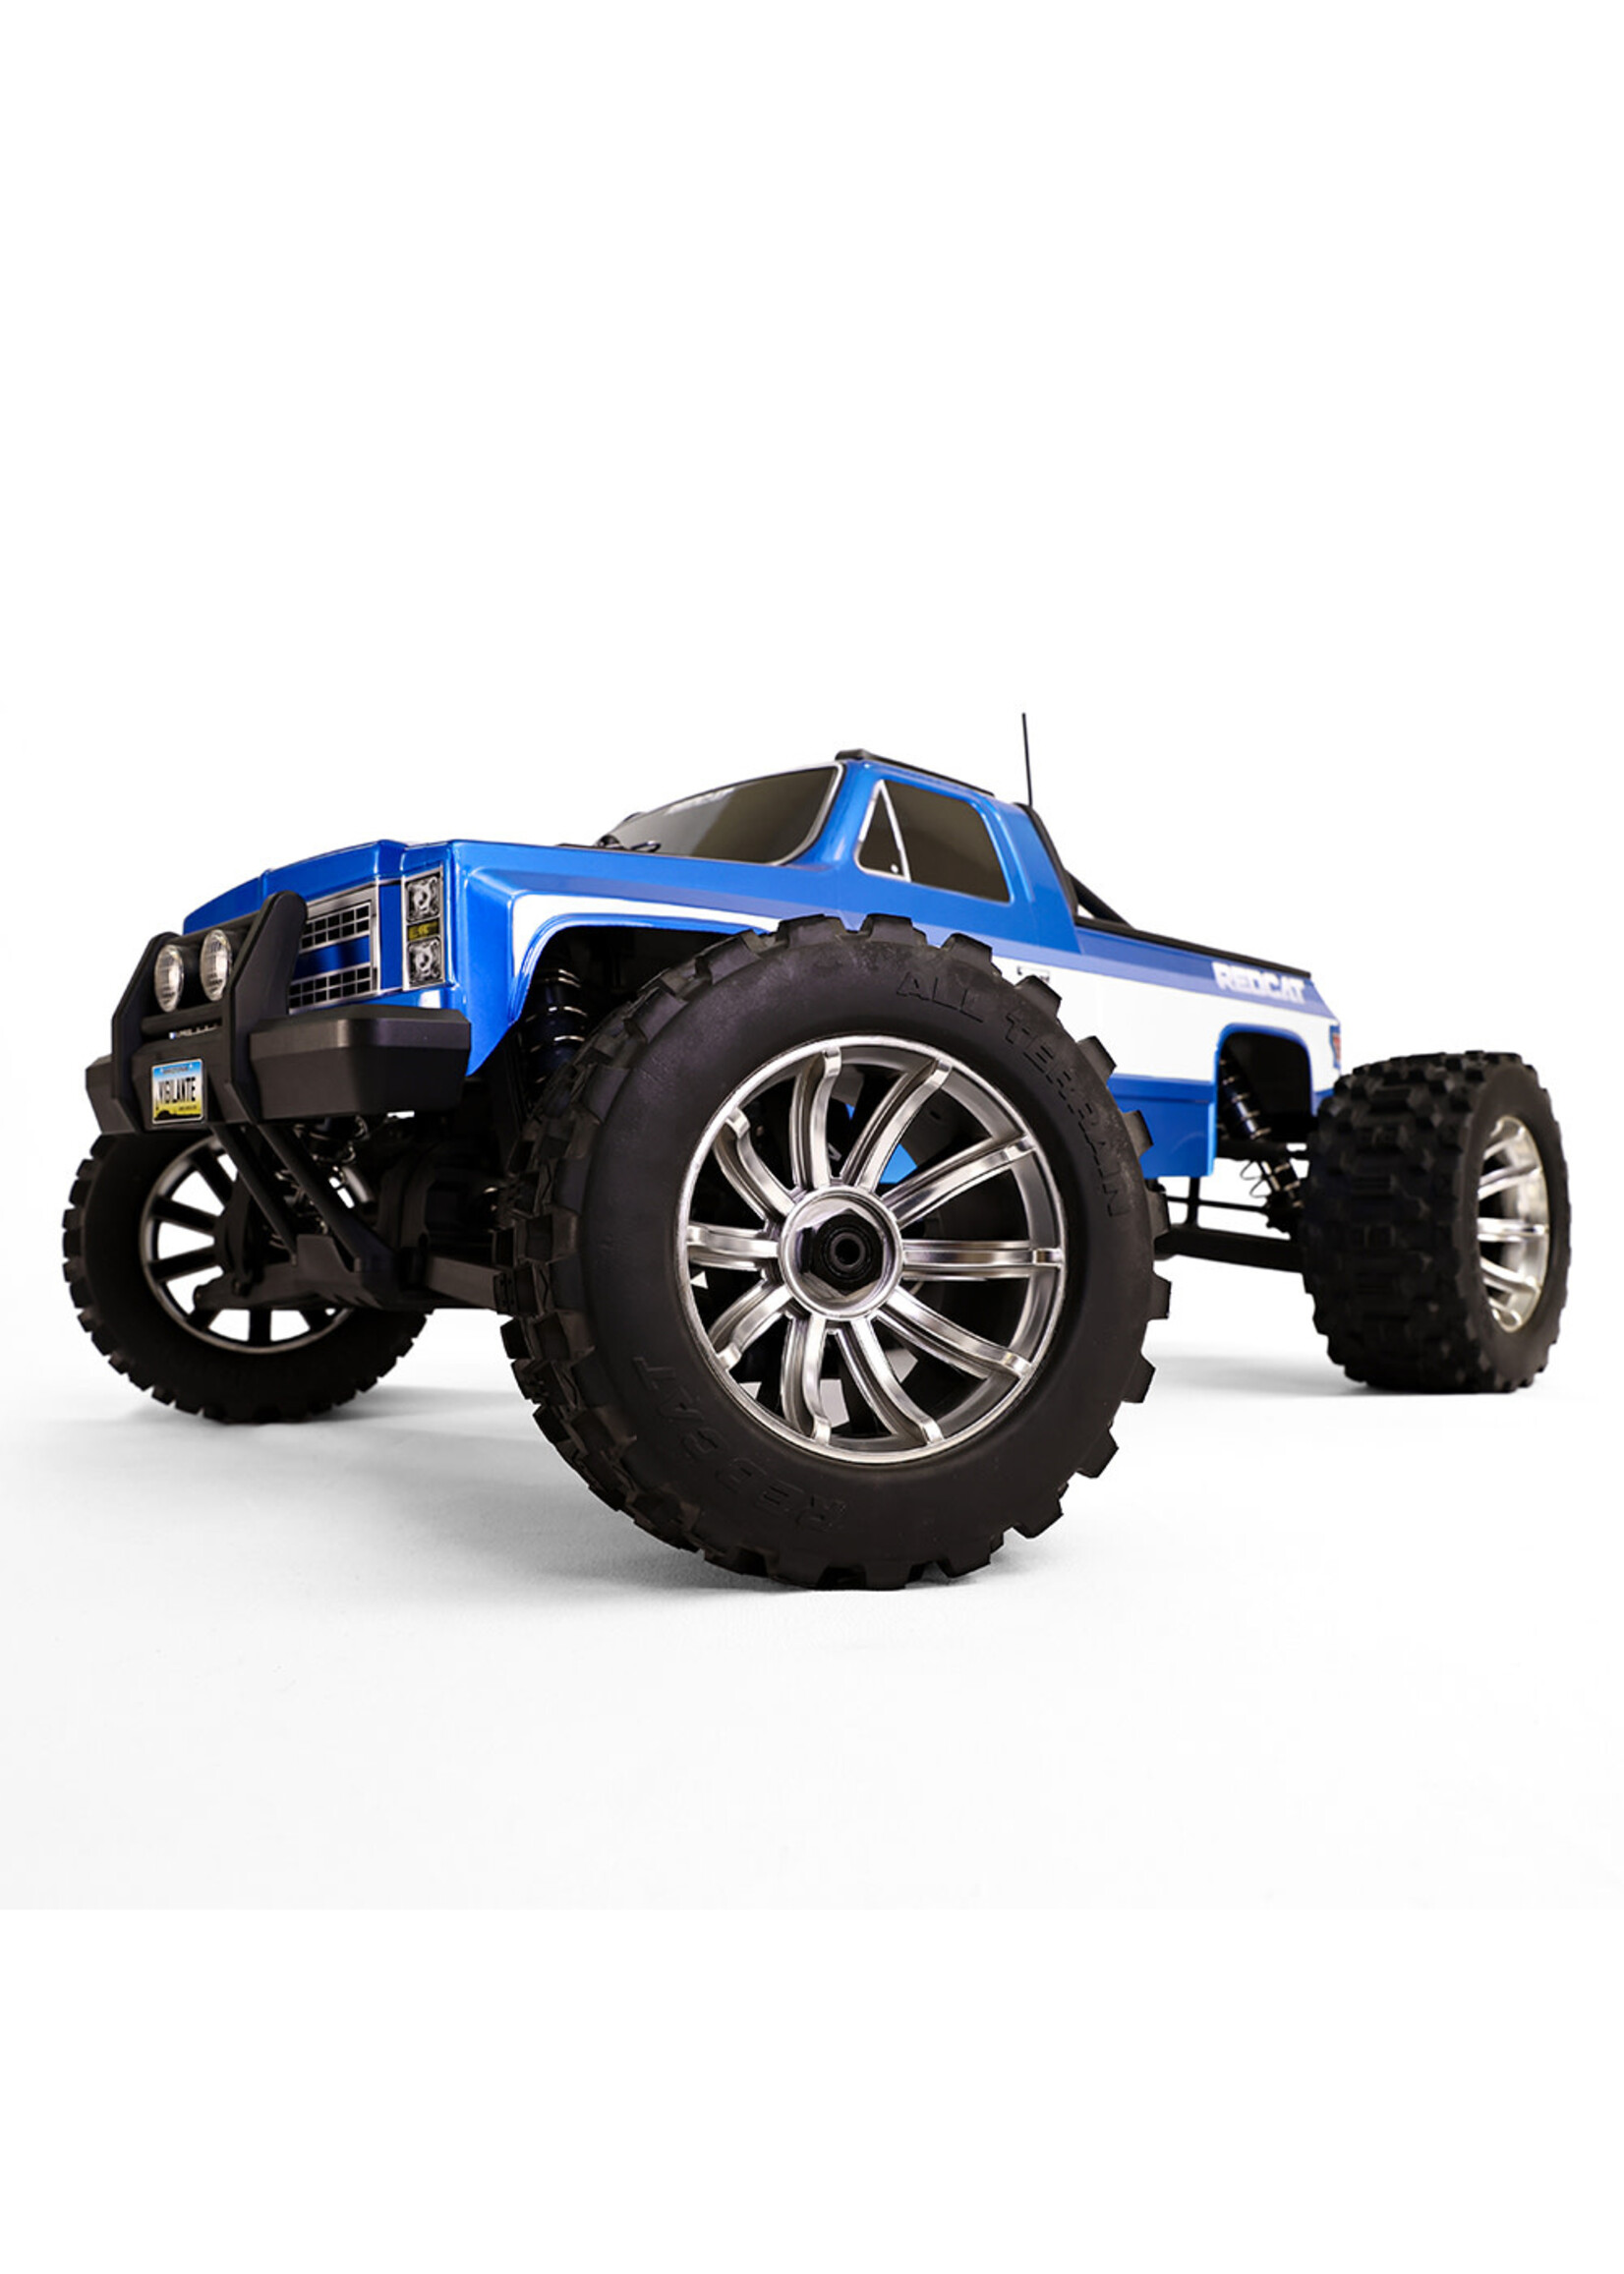 Redcat Racing RER28035 Redcat Racing Vigilante 1:5 Scale 8S Brushless Monster Truck (Blue)